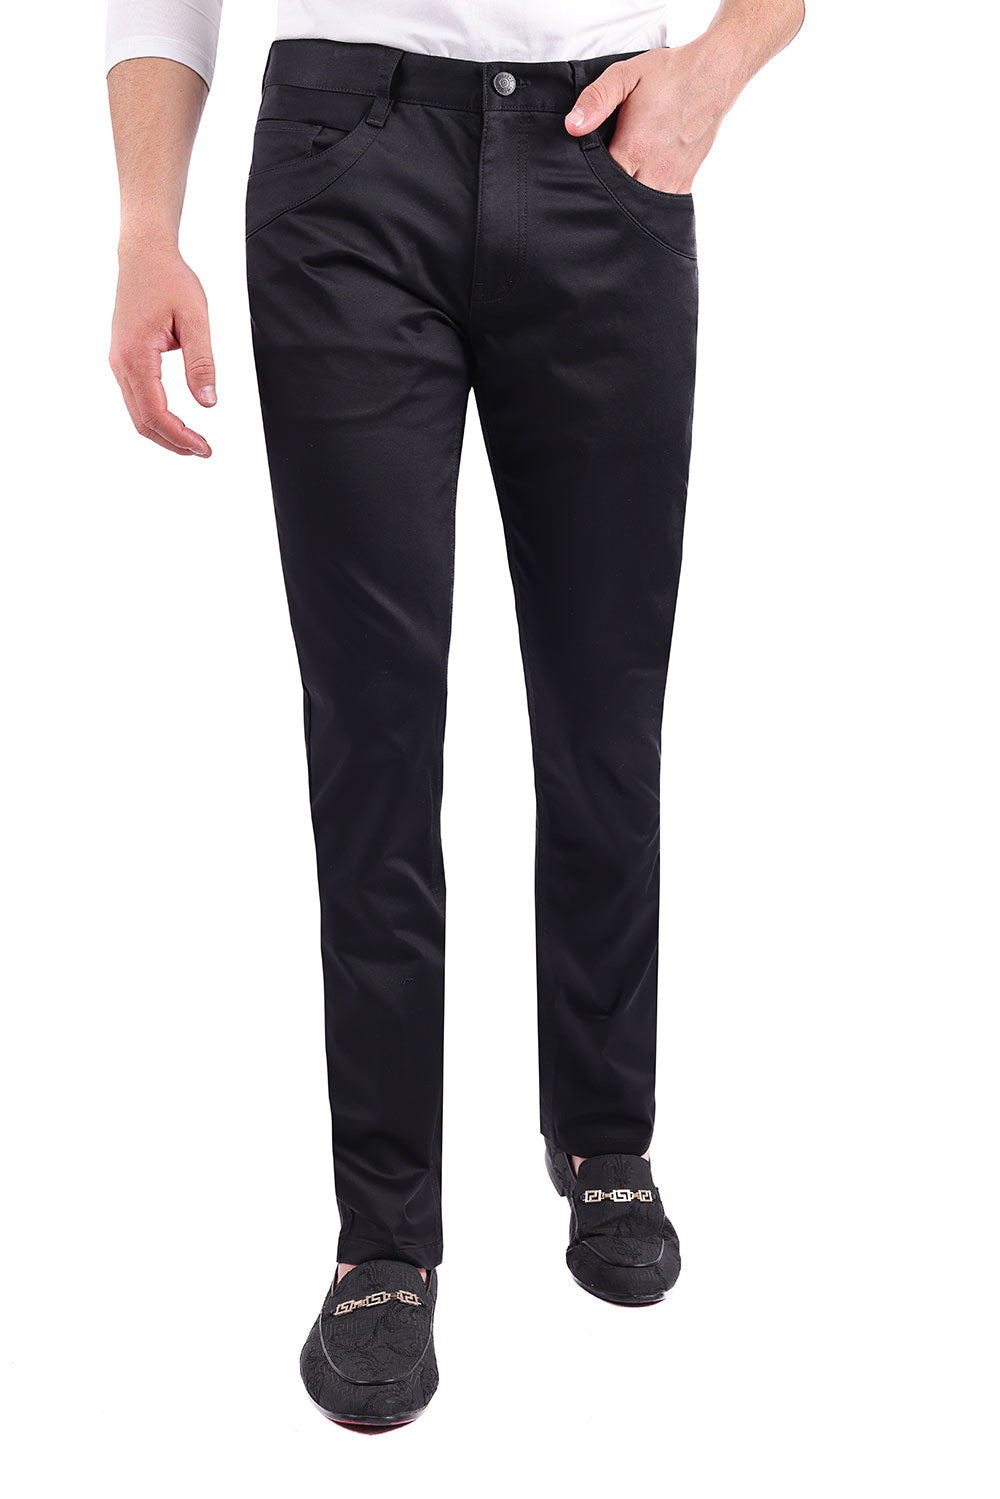 Barabas Men's Solid Color Basic Essential Chino Dress Pants 3CPW31 Black